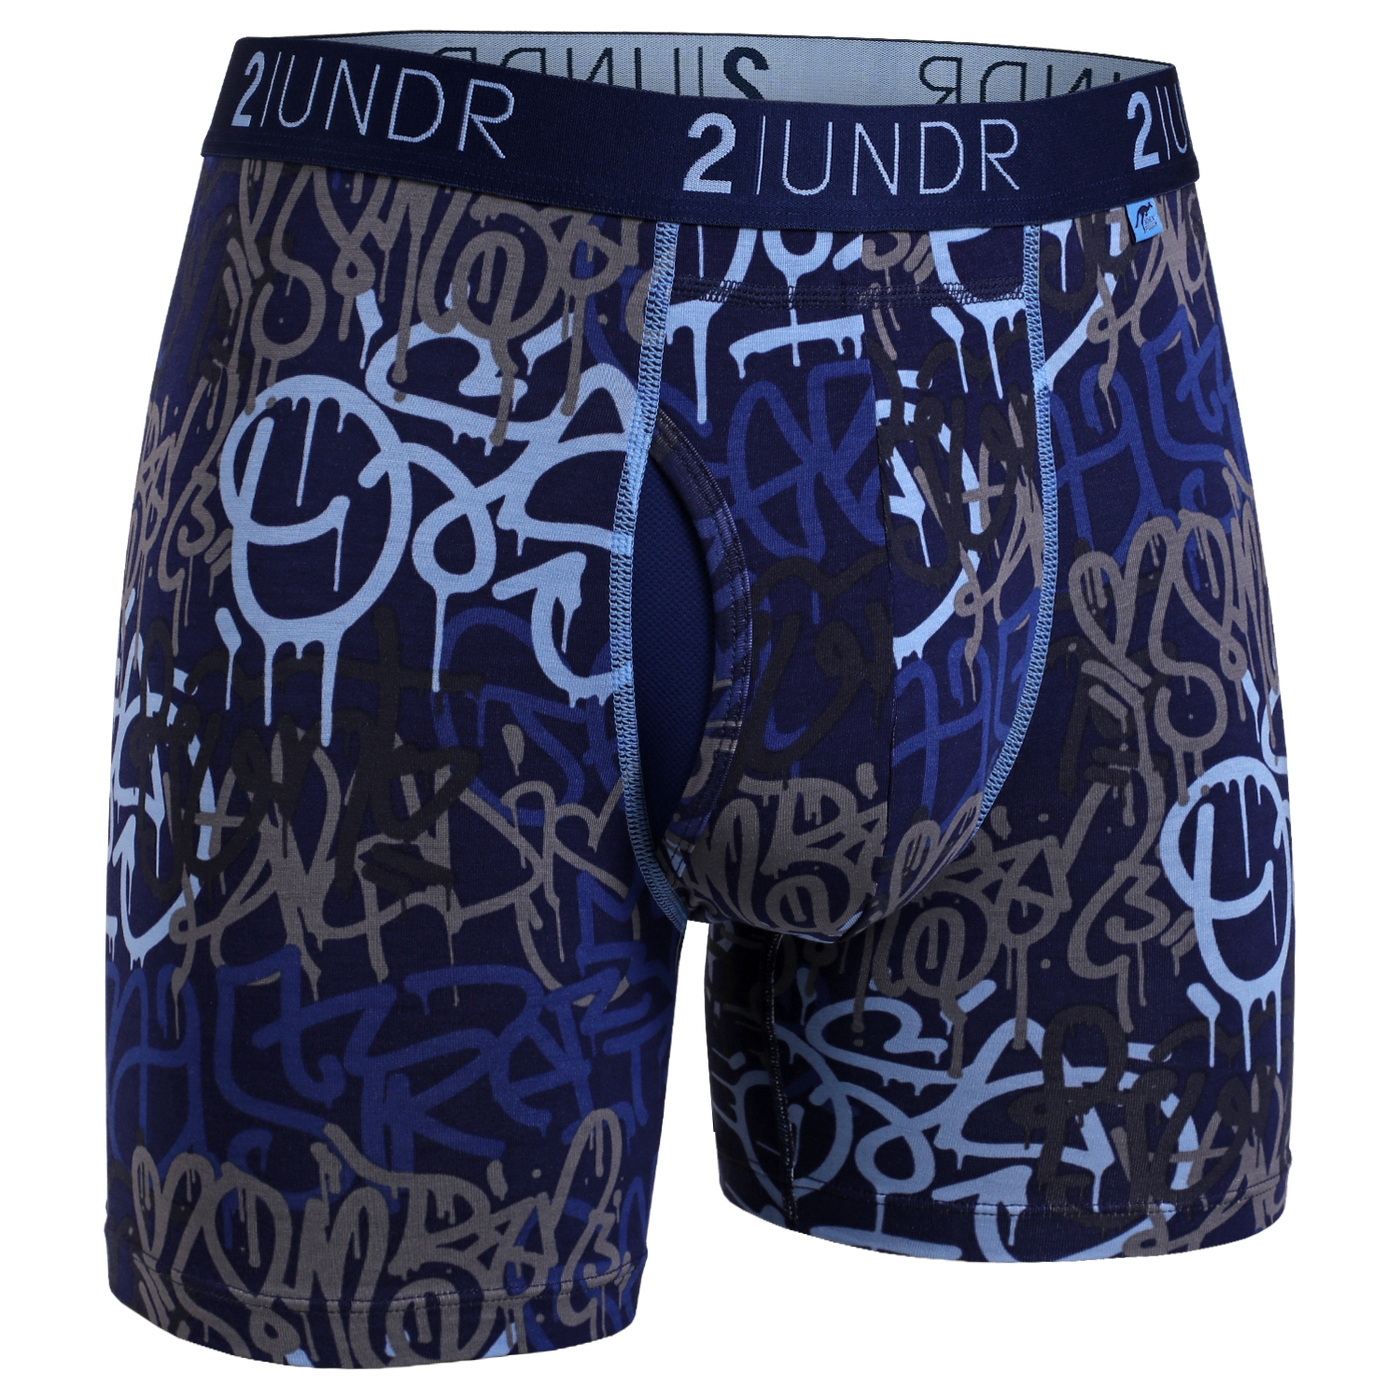 Swing Shift Boxer Brief - Drippings